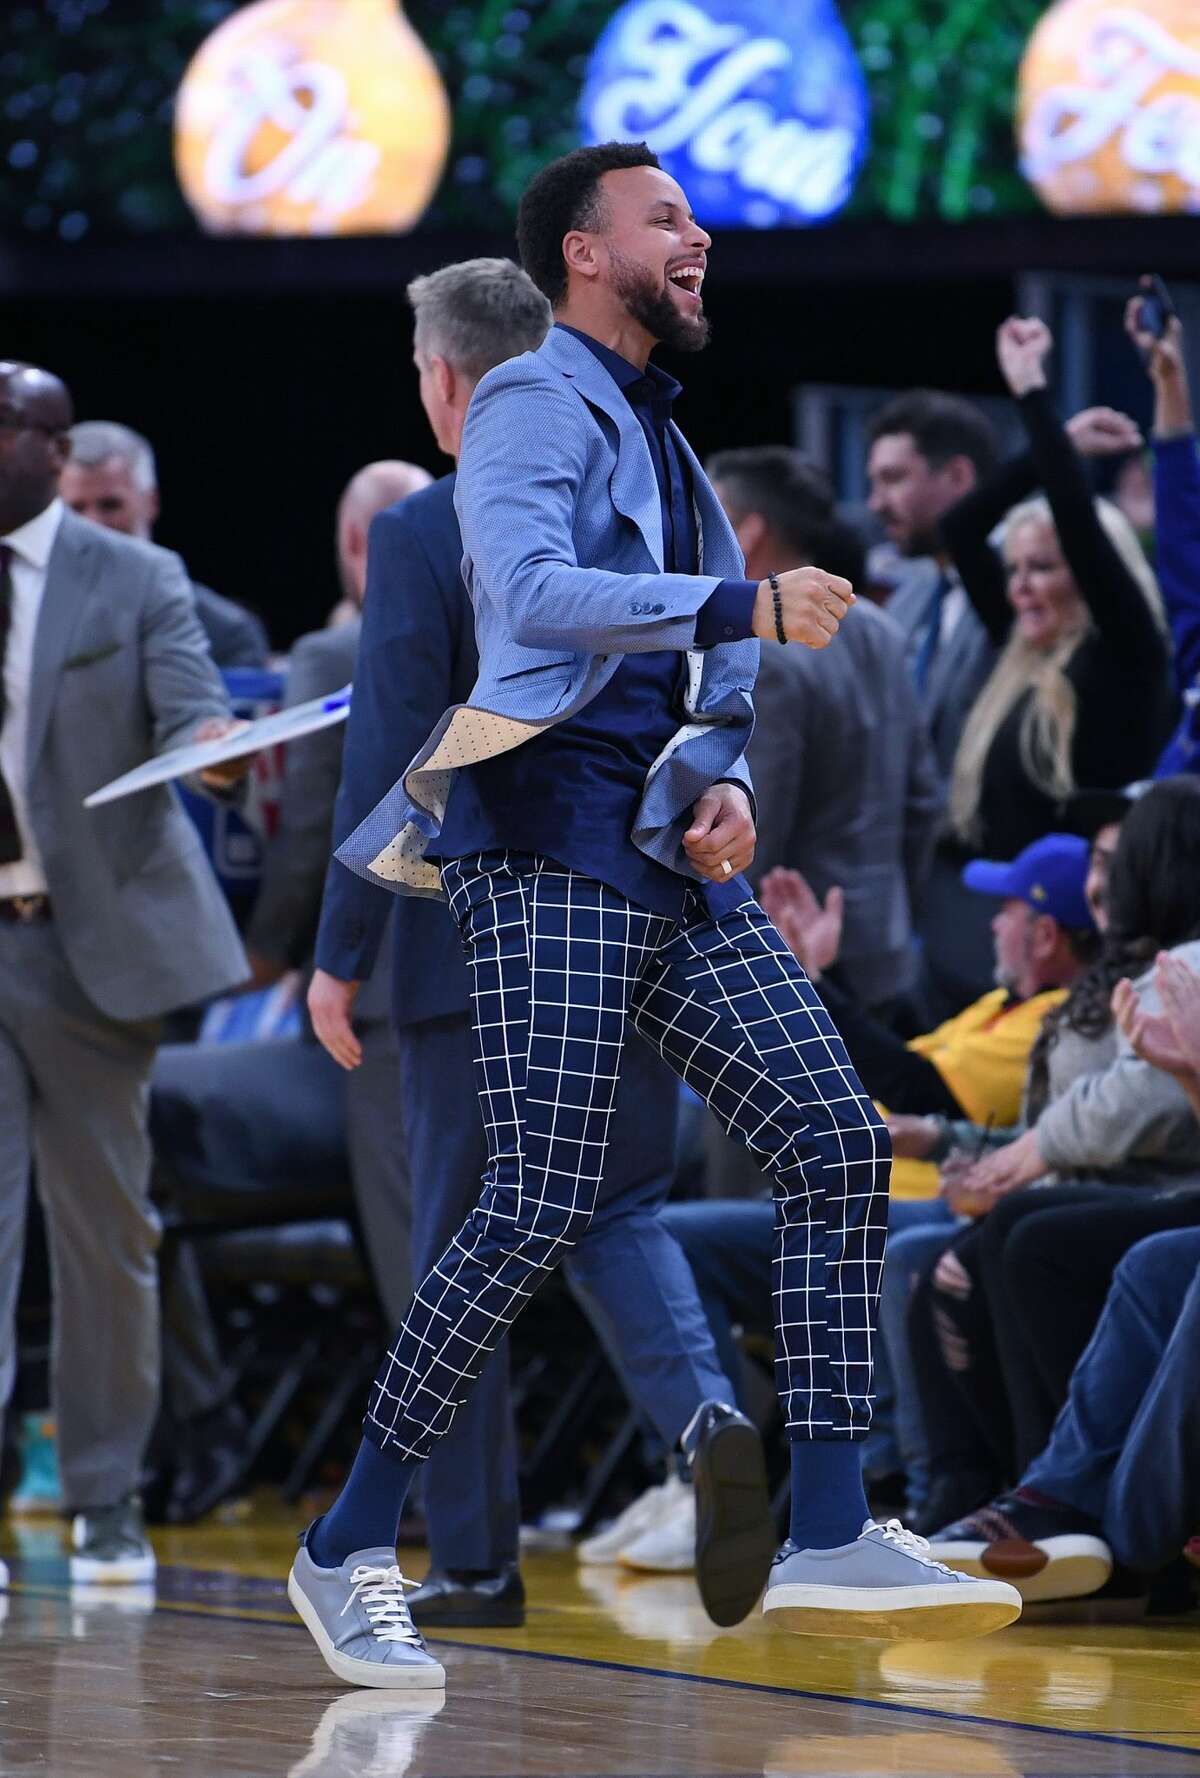 SAN FRANCISCO, CALIFORNIA - DECEMBER 25: Stephen Curry #30 of the Golden State Warriors celebrates off the bench after Draymond Green #23 made a three-point shot against the Houston Rockets during the second half of an NBA basketball game at Chase Center on December 25, 2019 in San Francisco, California. NOTE TO USER: User expressly acknowledges and agrees that, by downloading and or using this photograph, User is consenting to the terms and conditions of the Getty Images License Agreement. (Photo by Thearon W. Henderson/Getty Images)